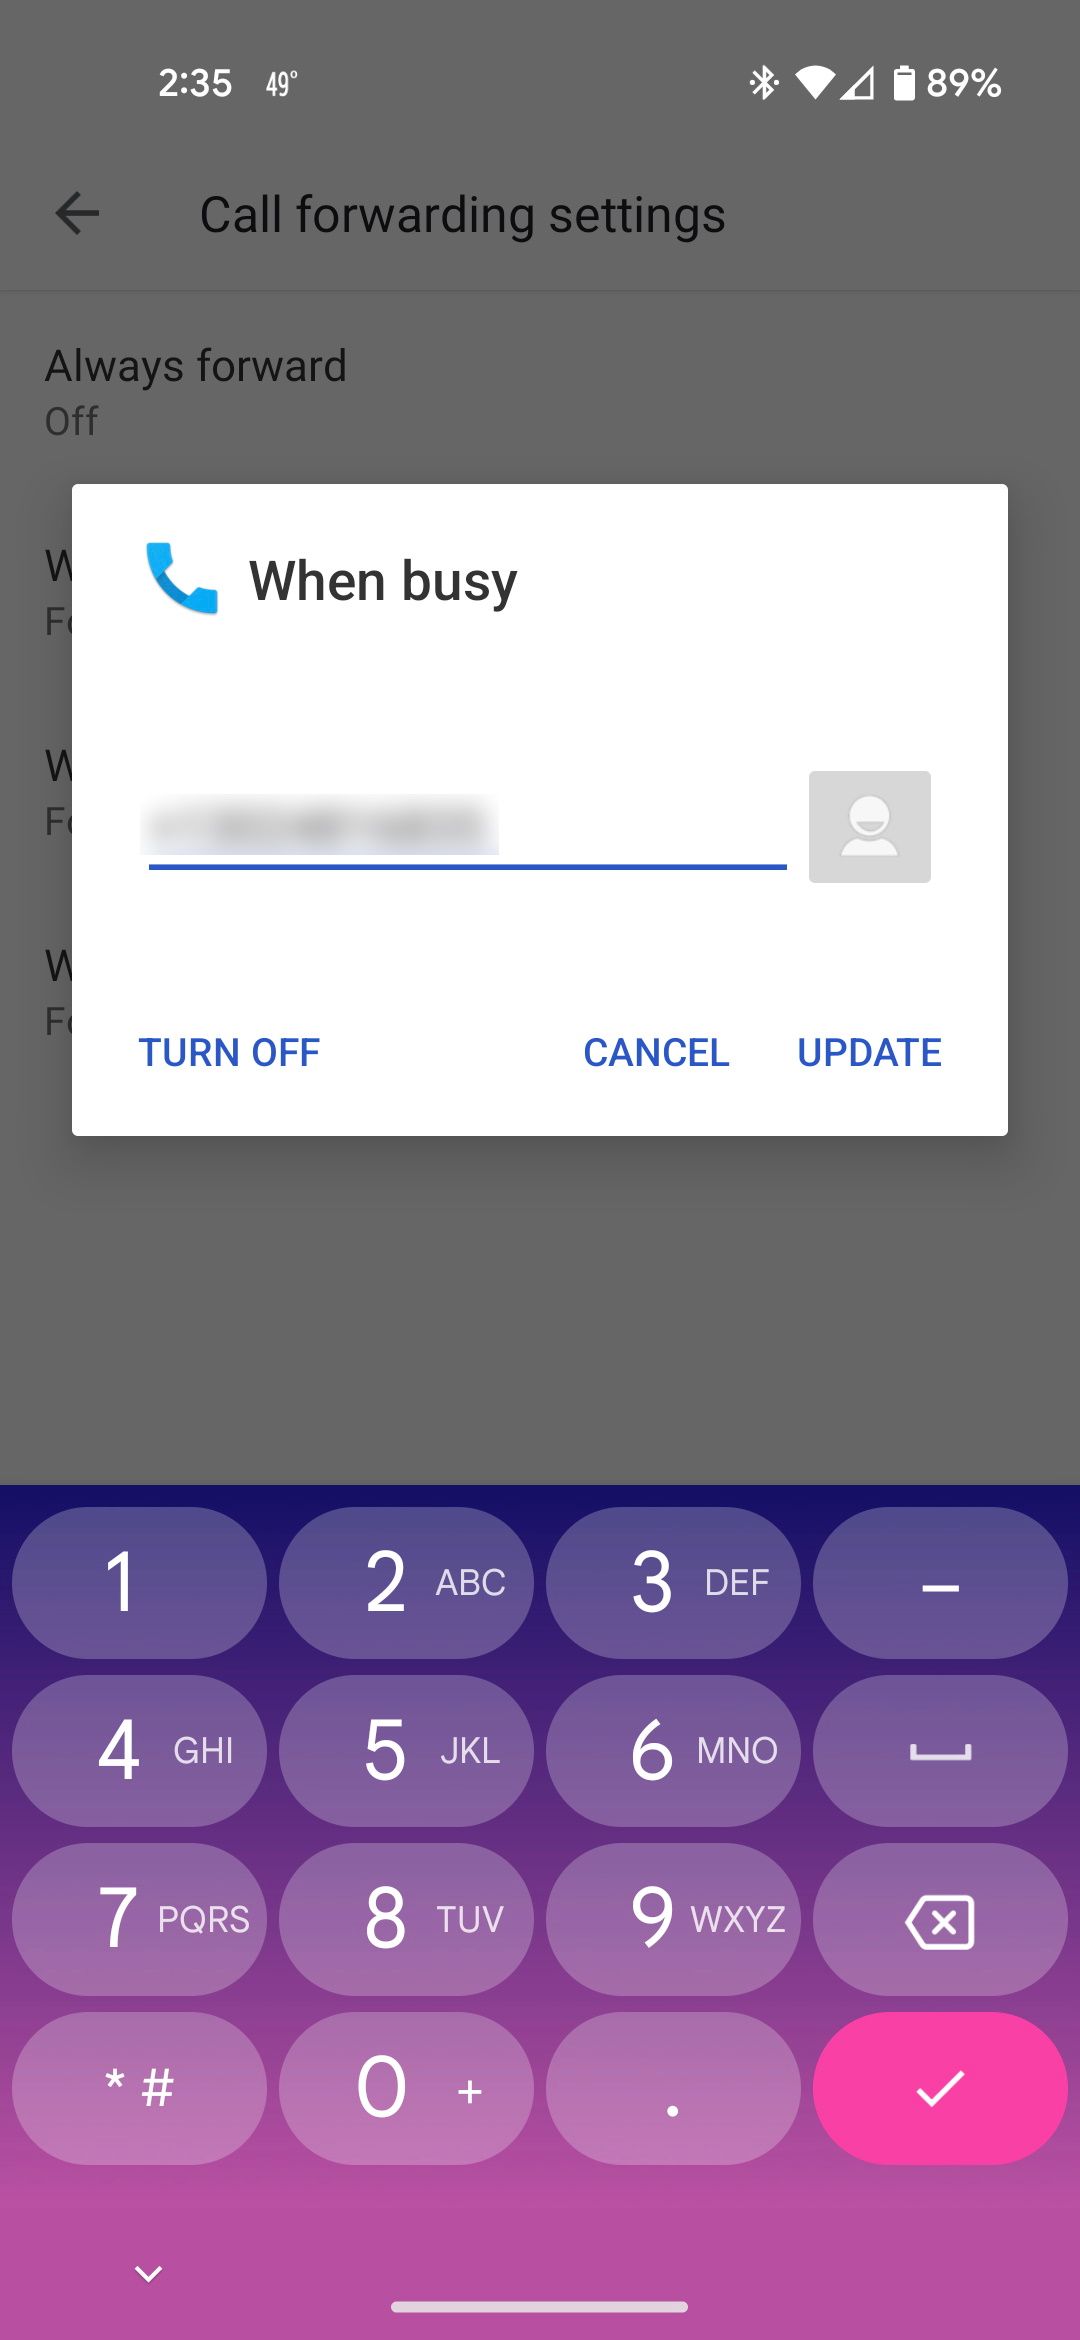 Adding a number to call forwarding when busy rule in Android phone app